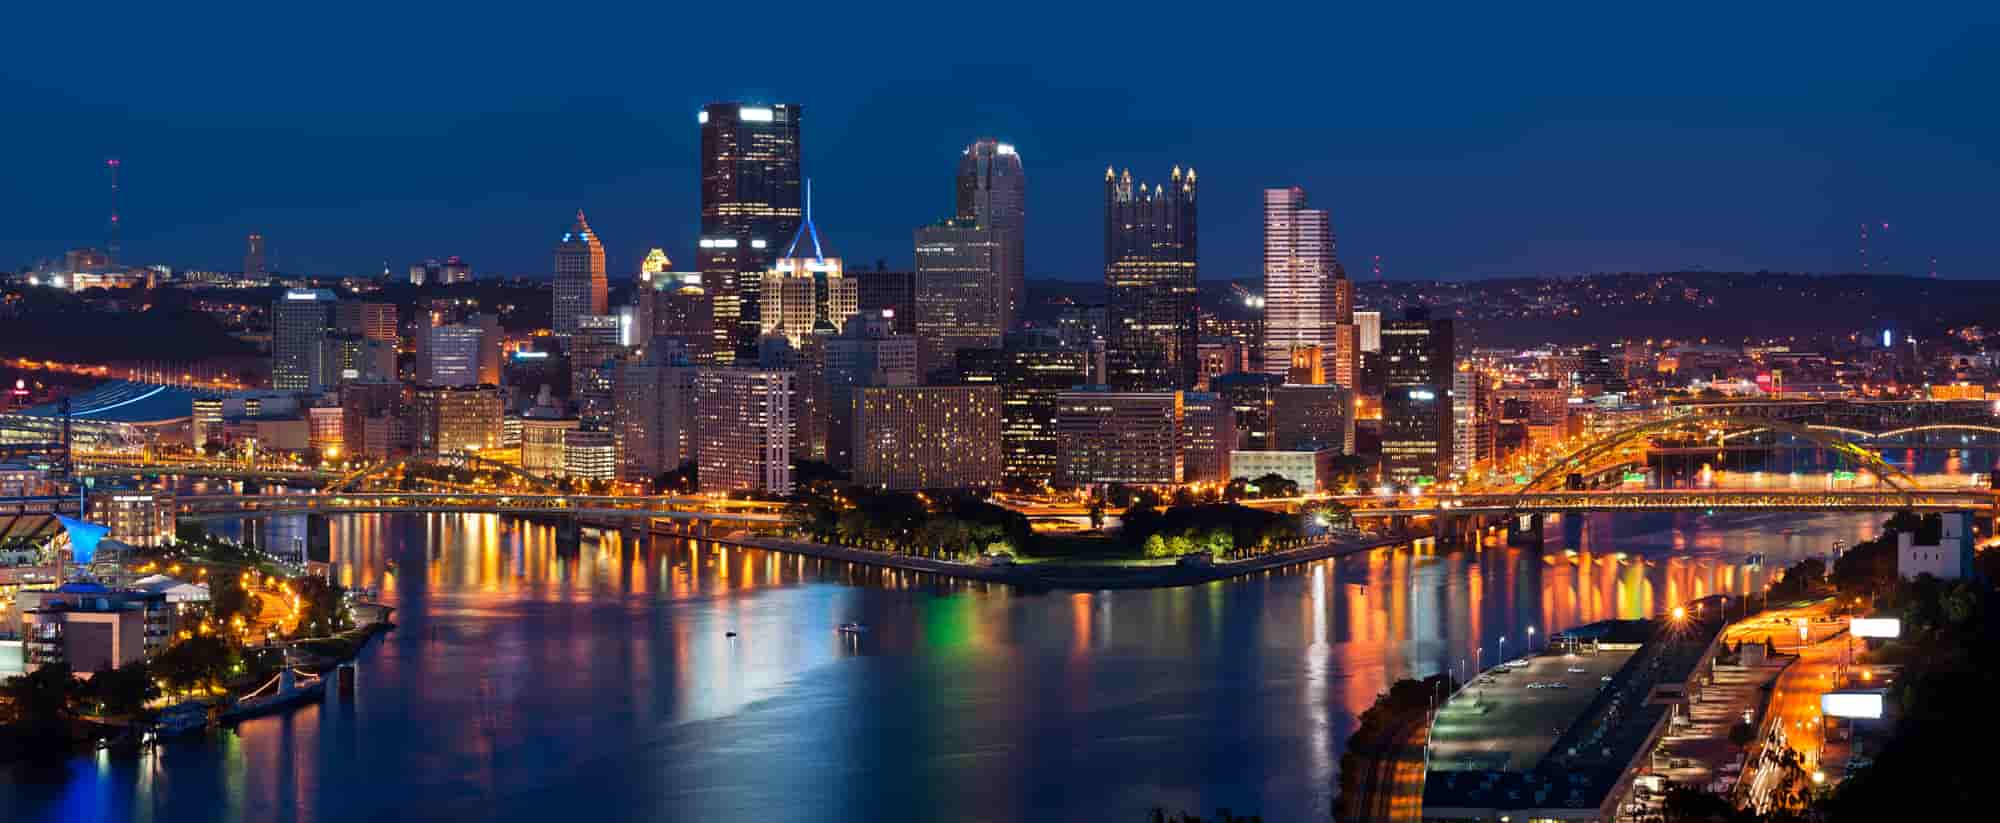 Pittsburgh Real Estate Market Prices, Trends & Forecasts 2022